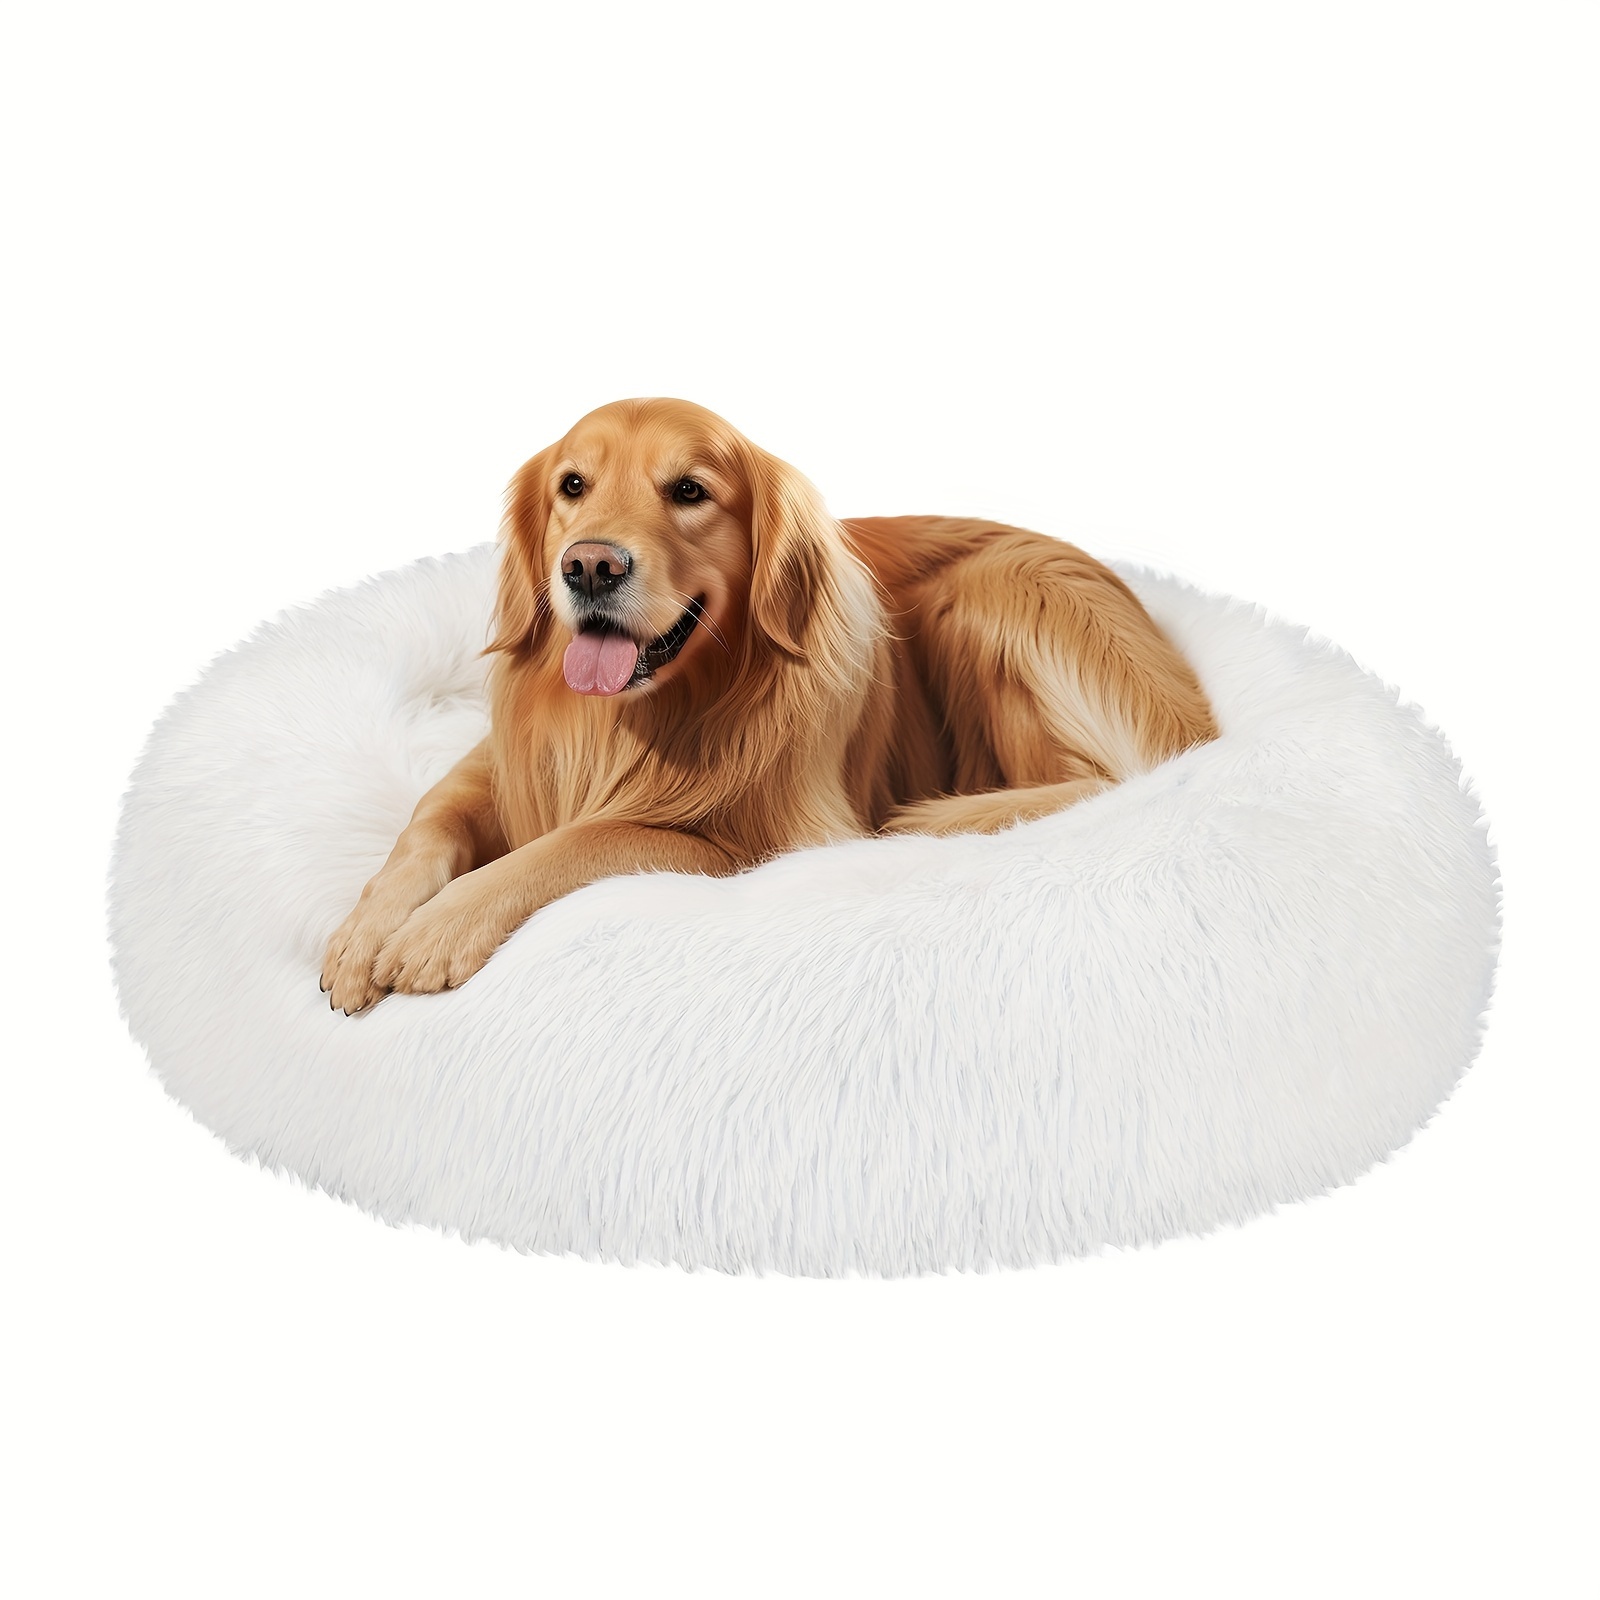 

Veehoo Dog Bed For Large, Medium, Small, And Extra Small Breeds, Round Design With Non-slip Bottom, Machine Washable, Calming And Comfortable